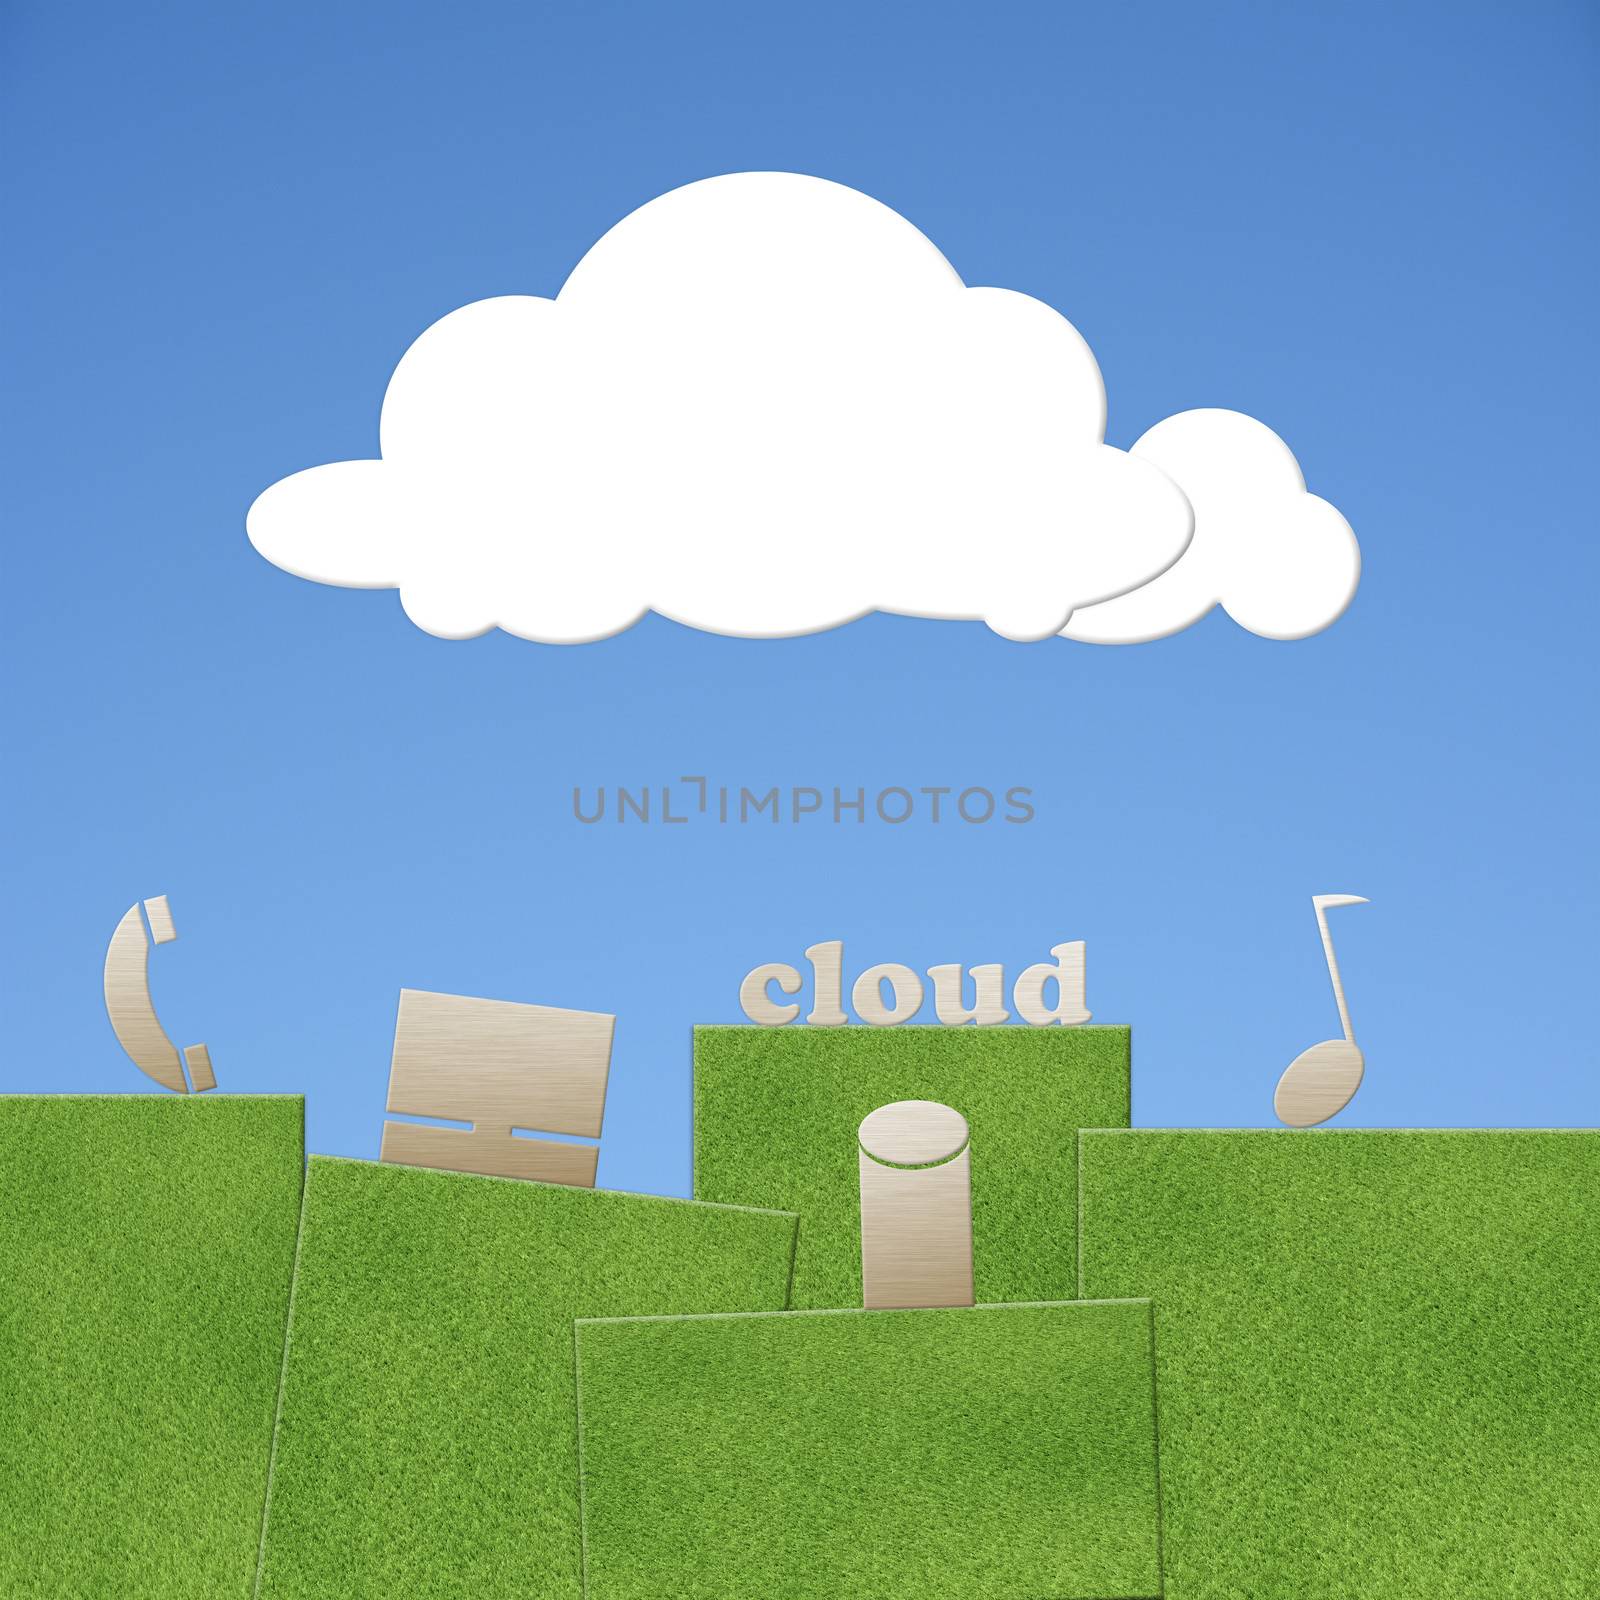 Cloud concept image with grassland under blue sky and blank cloud over heaven.